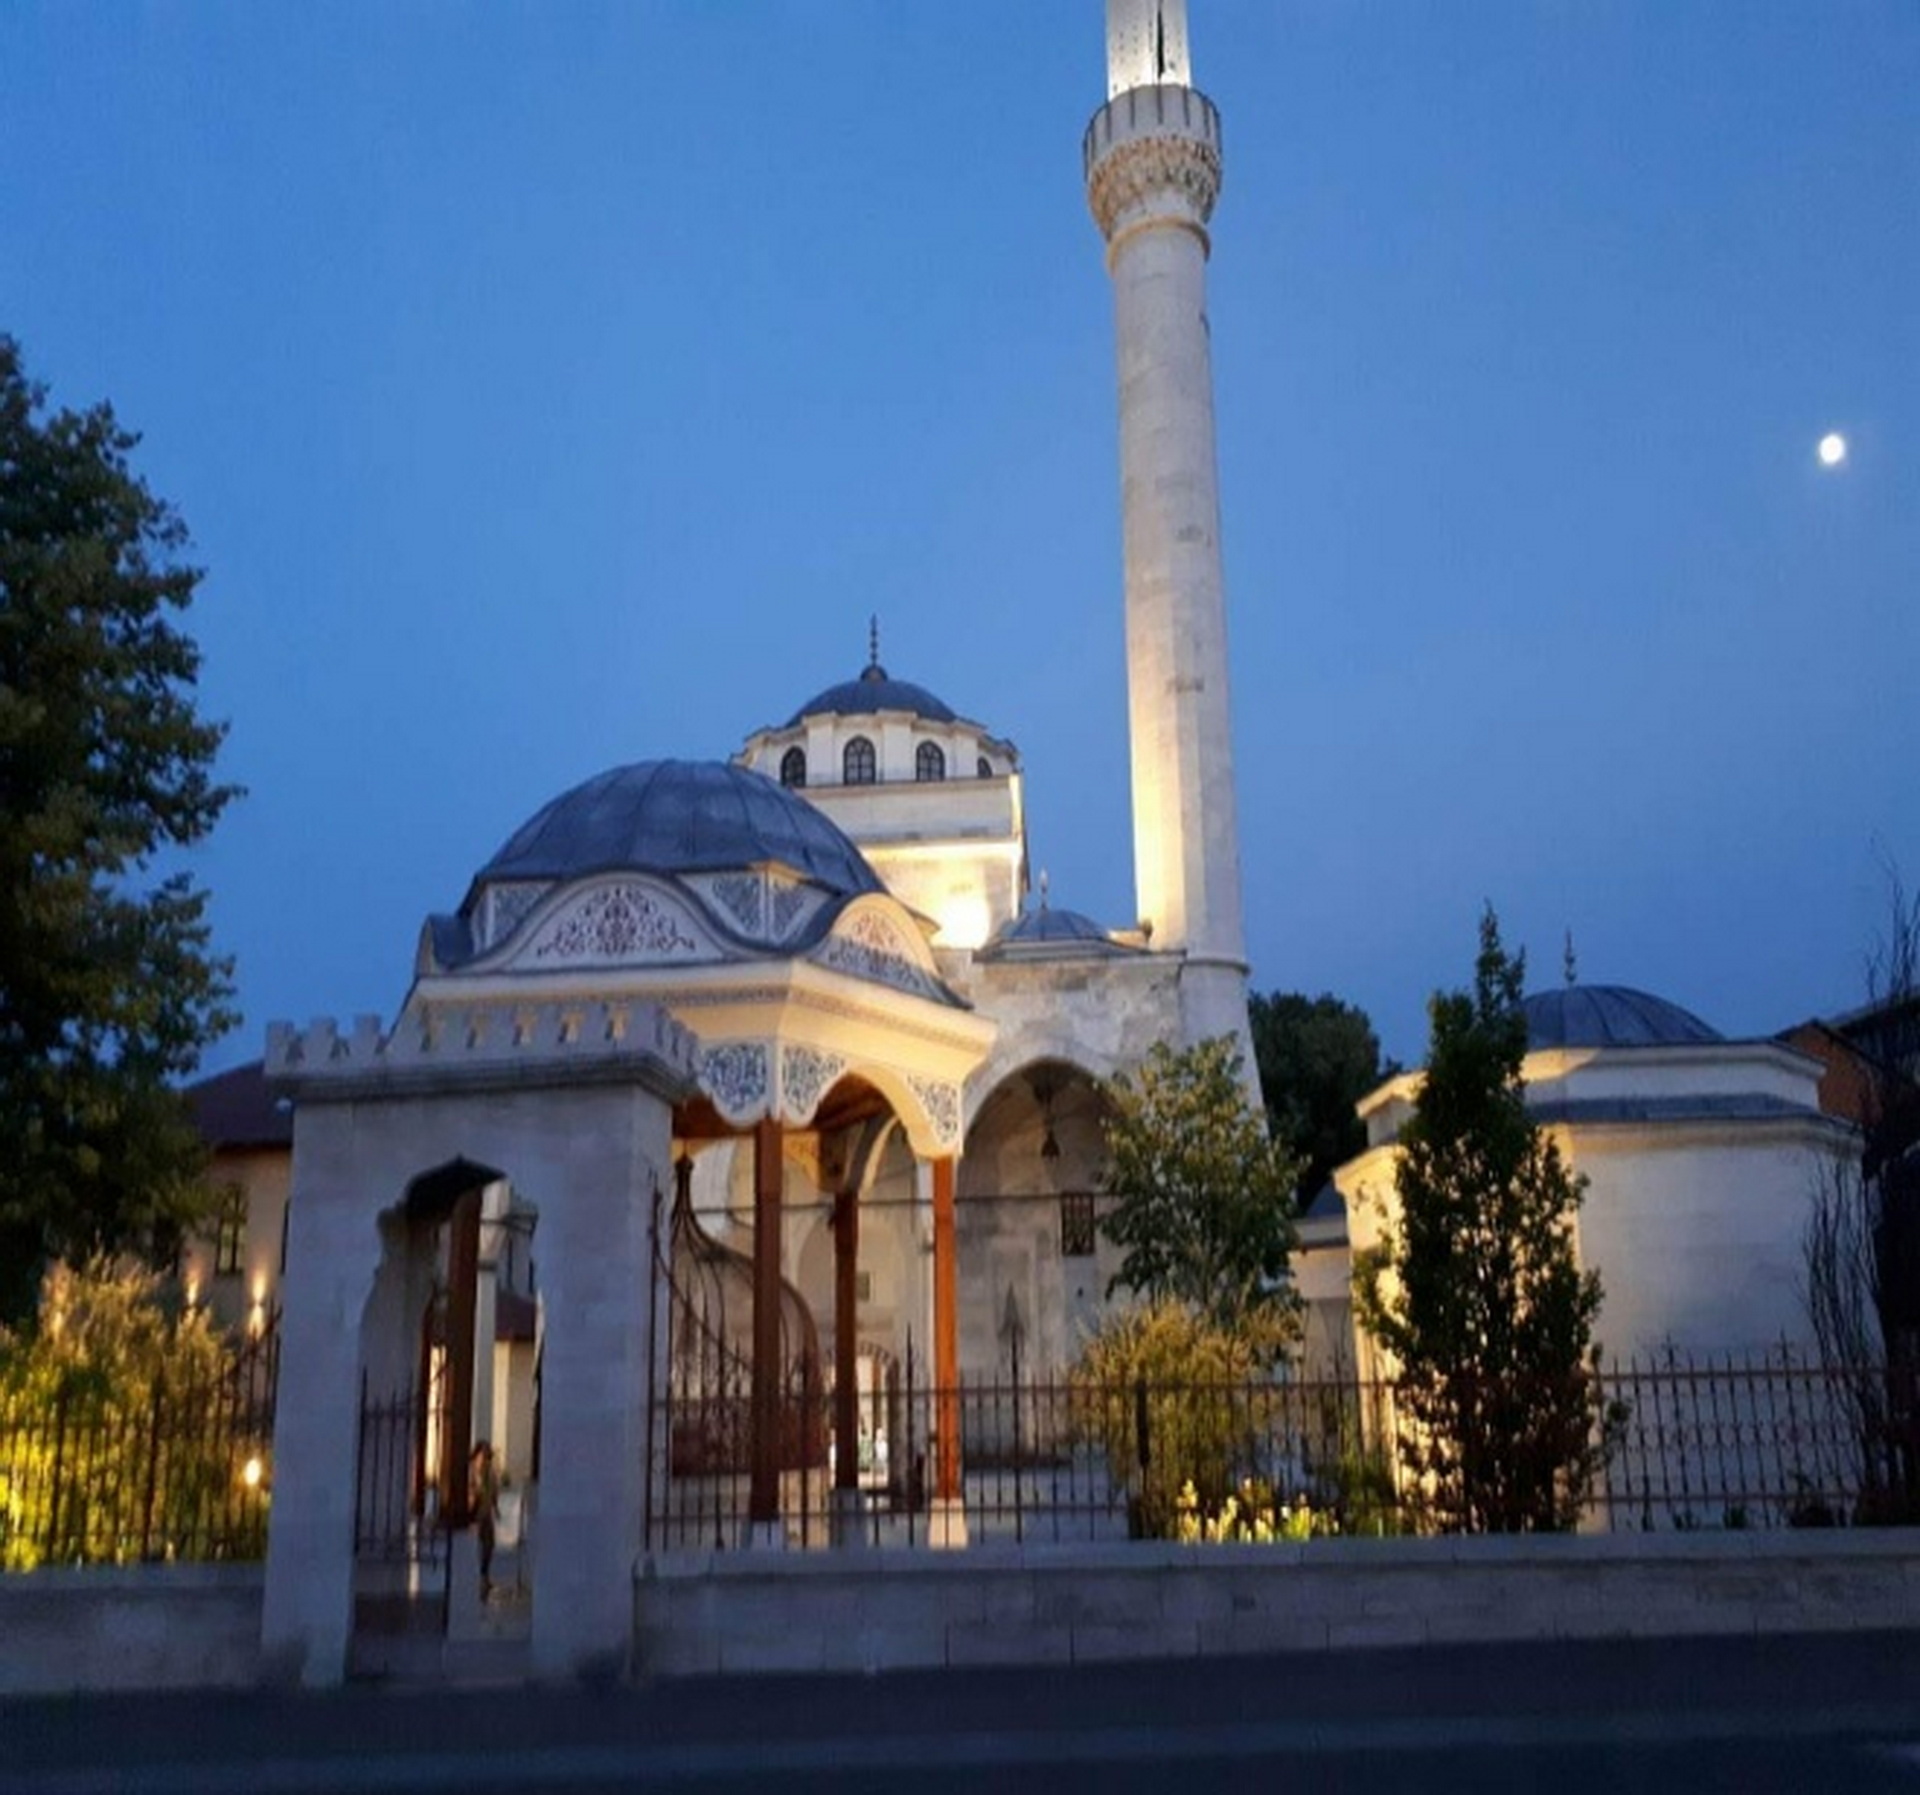 <p>&nbsp;"And the moon saw the illuminated mosque in the reflection"</p>